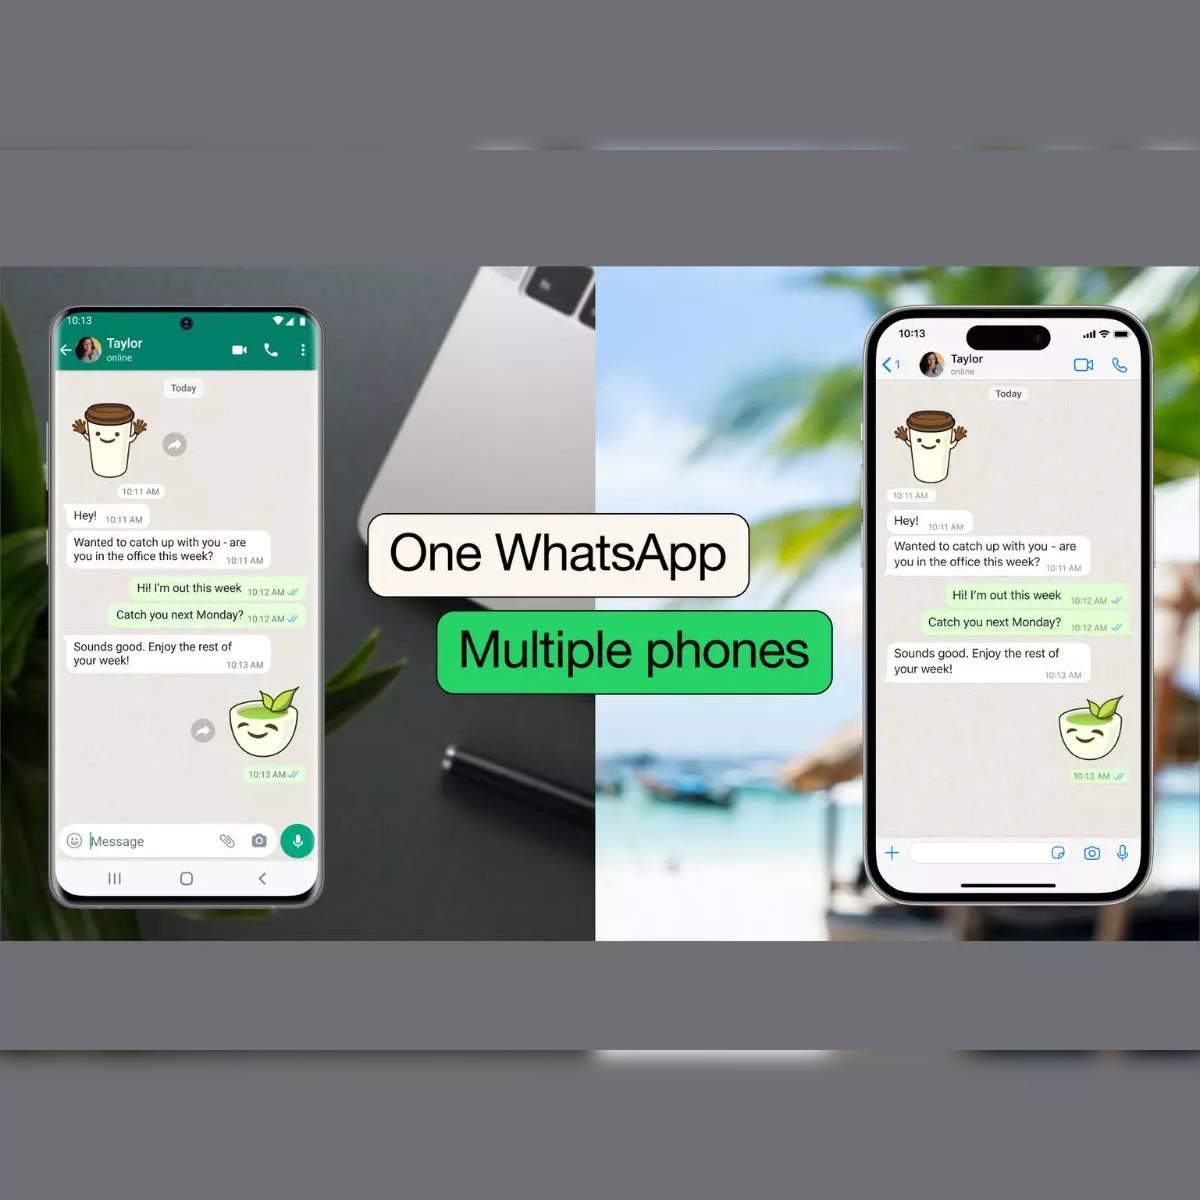 WhatsApp Memes: WhatsApp rolls out multi-device login feature, social media  flooded with memes - The Economic Times